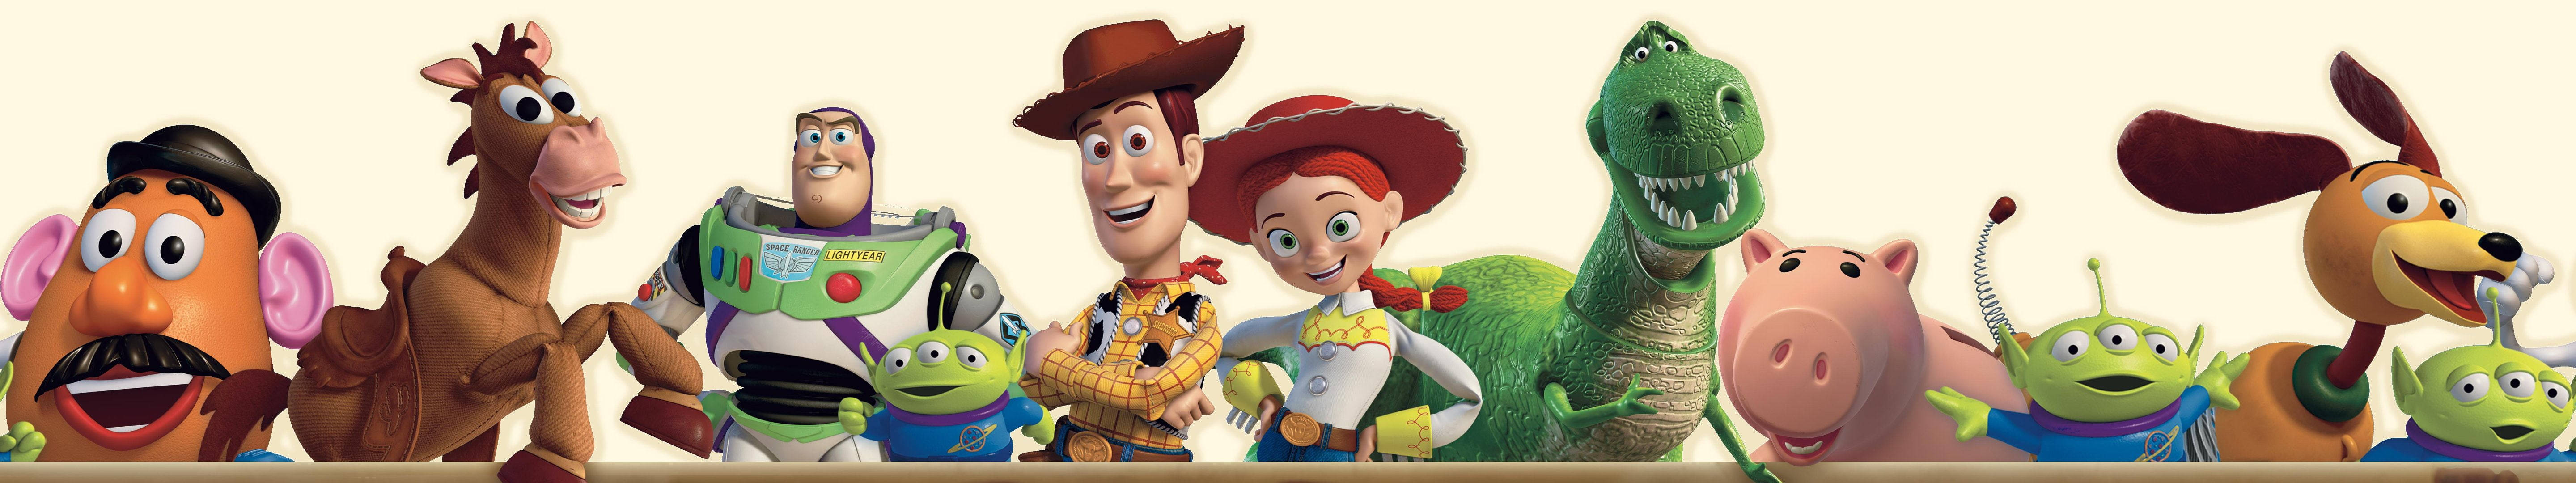 3 Monitor Toy Story Wallpaper